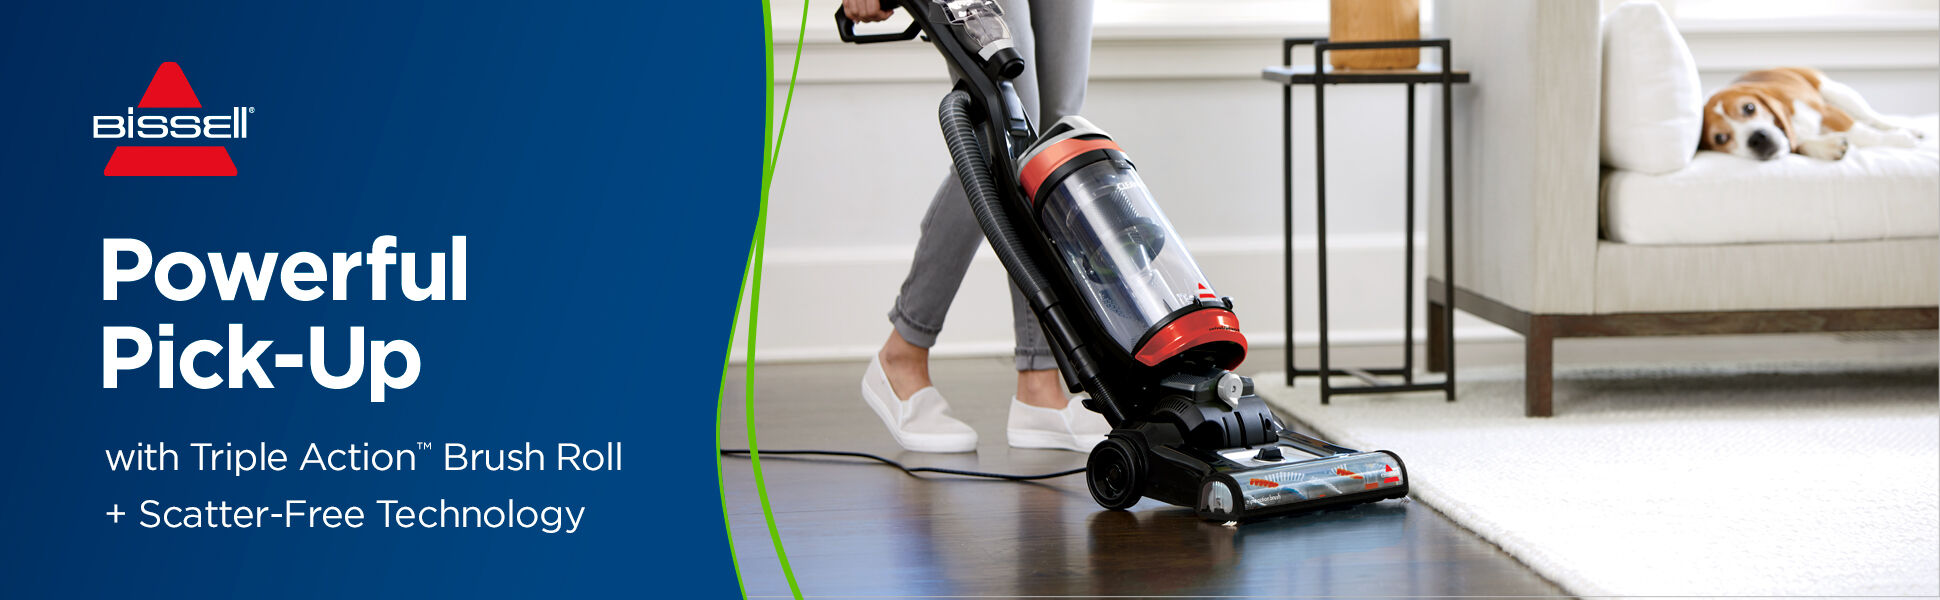 CleanView® Swivel Pet Vac Demo. Text: Powerful Pet Hair Pick-Up with Triple Action Brush Roll + Scatter-Free Technology